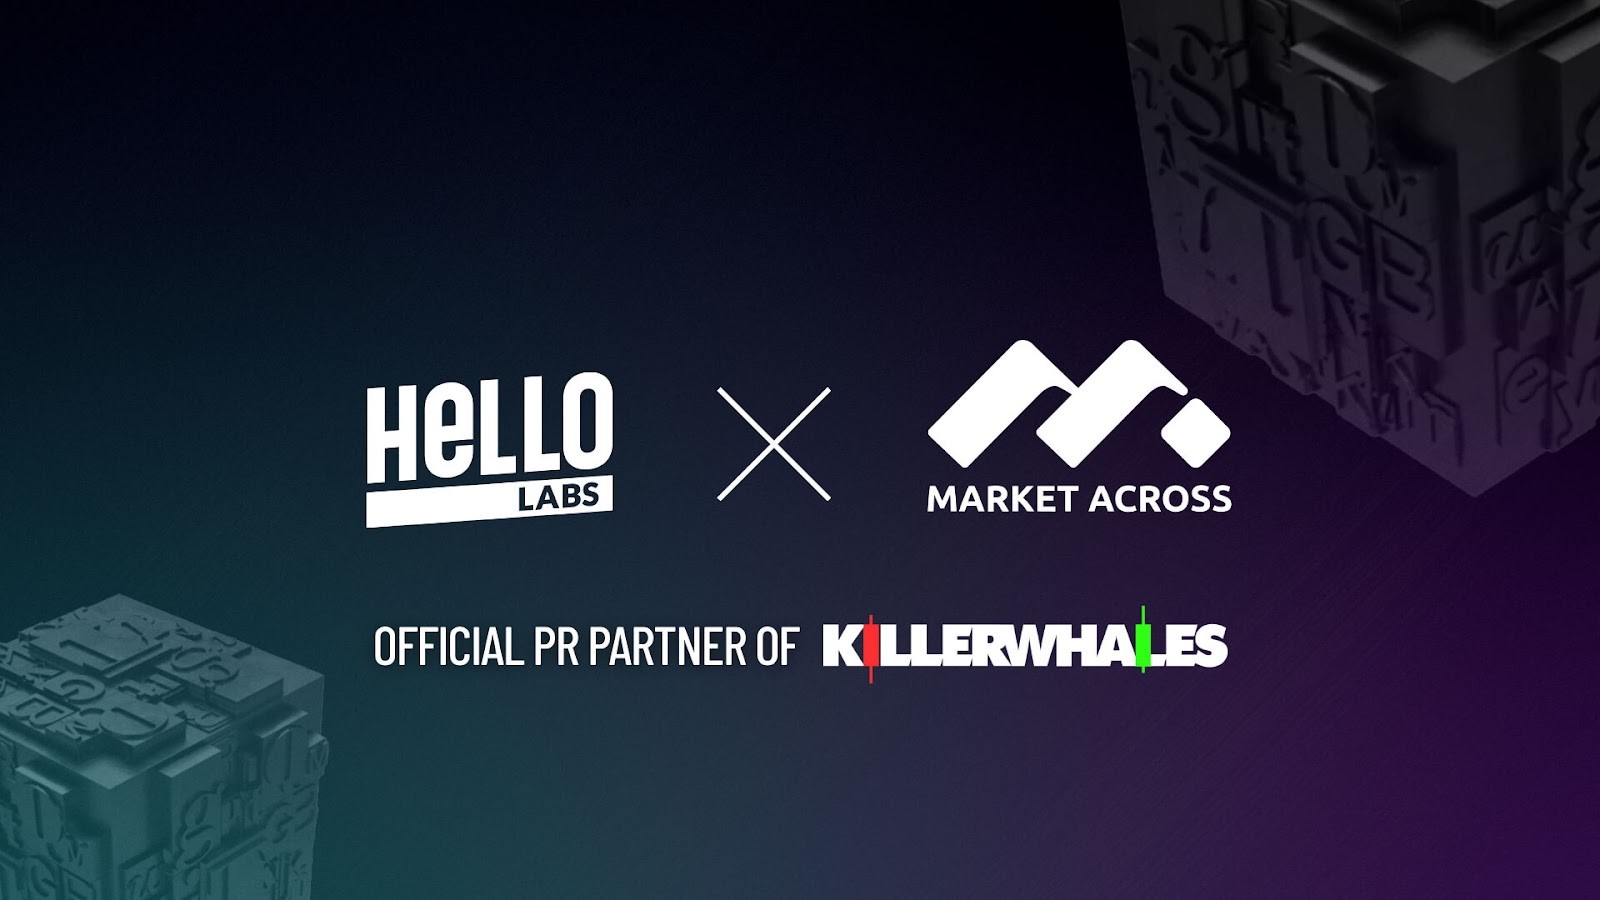 MarketAcross and HELLO Labs Partner for Launch of 'Killer Whales' Web3 TV Series